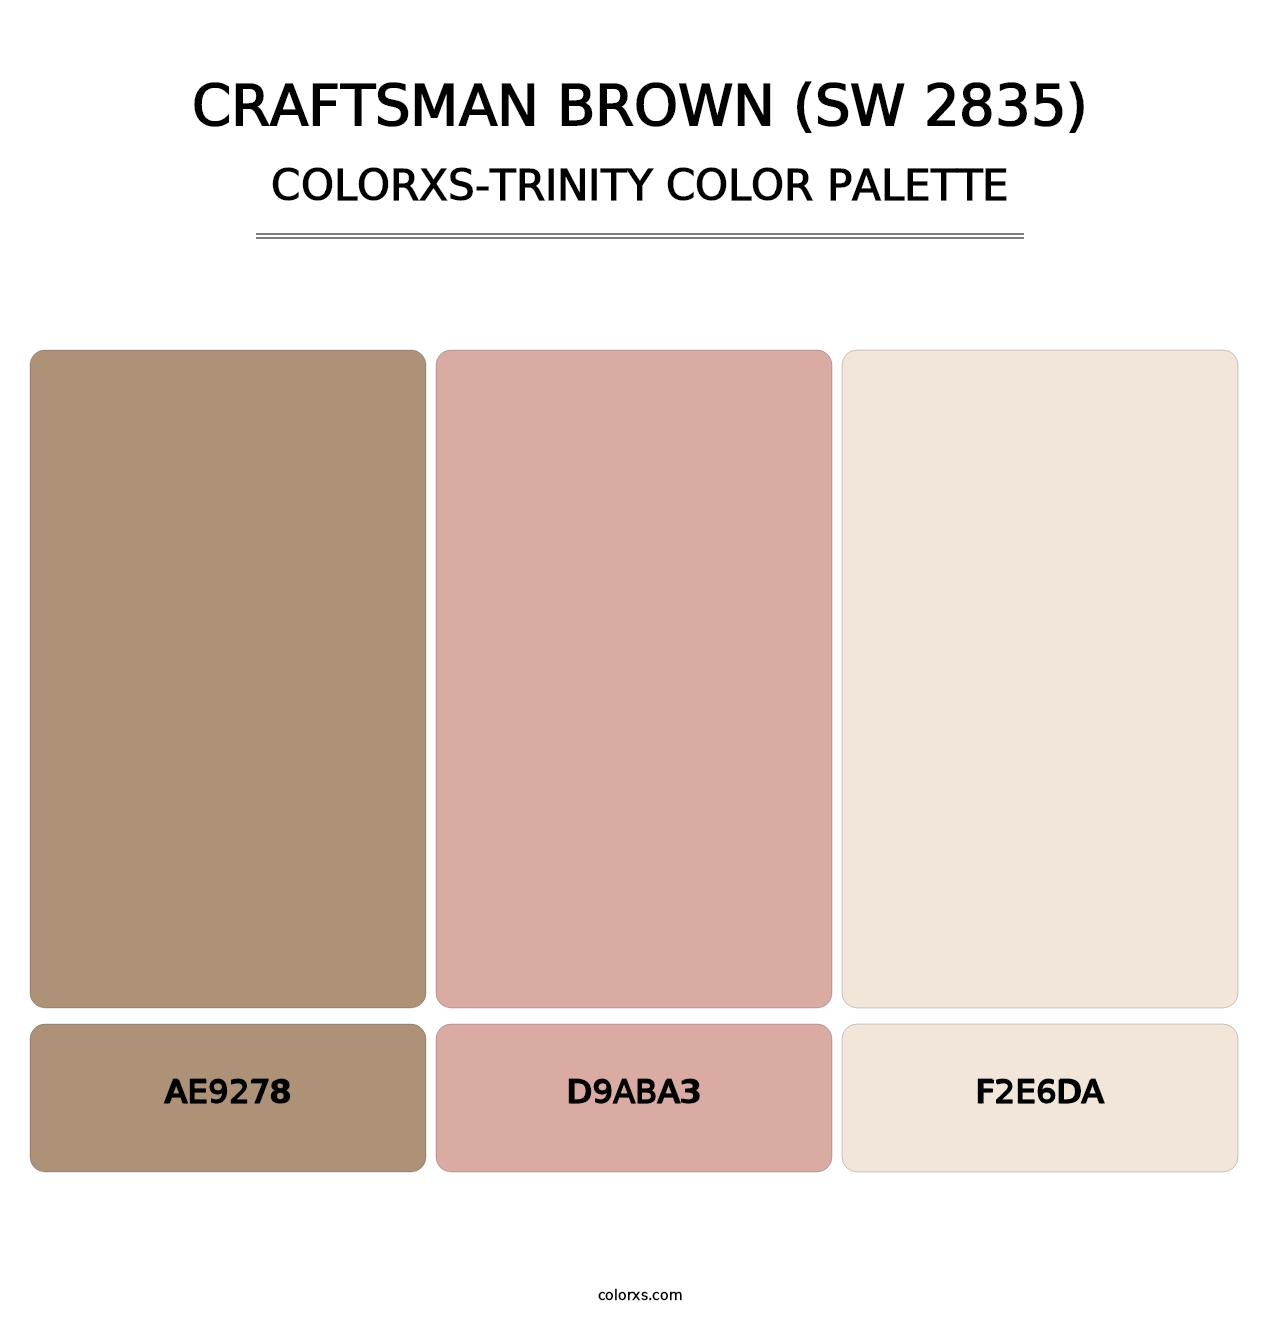 Craftsman Brown (SW 2835) - Colorxs Trinity Palette